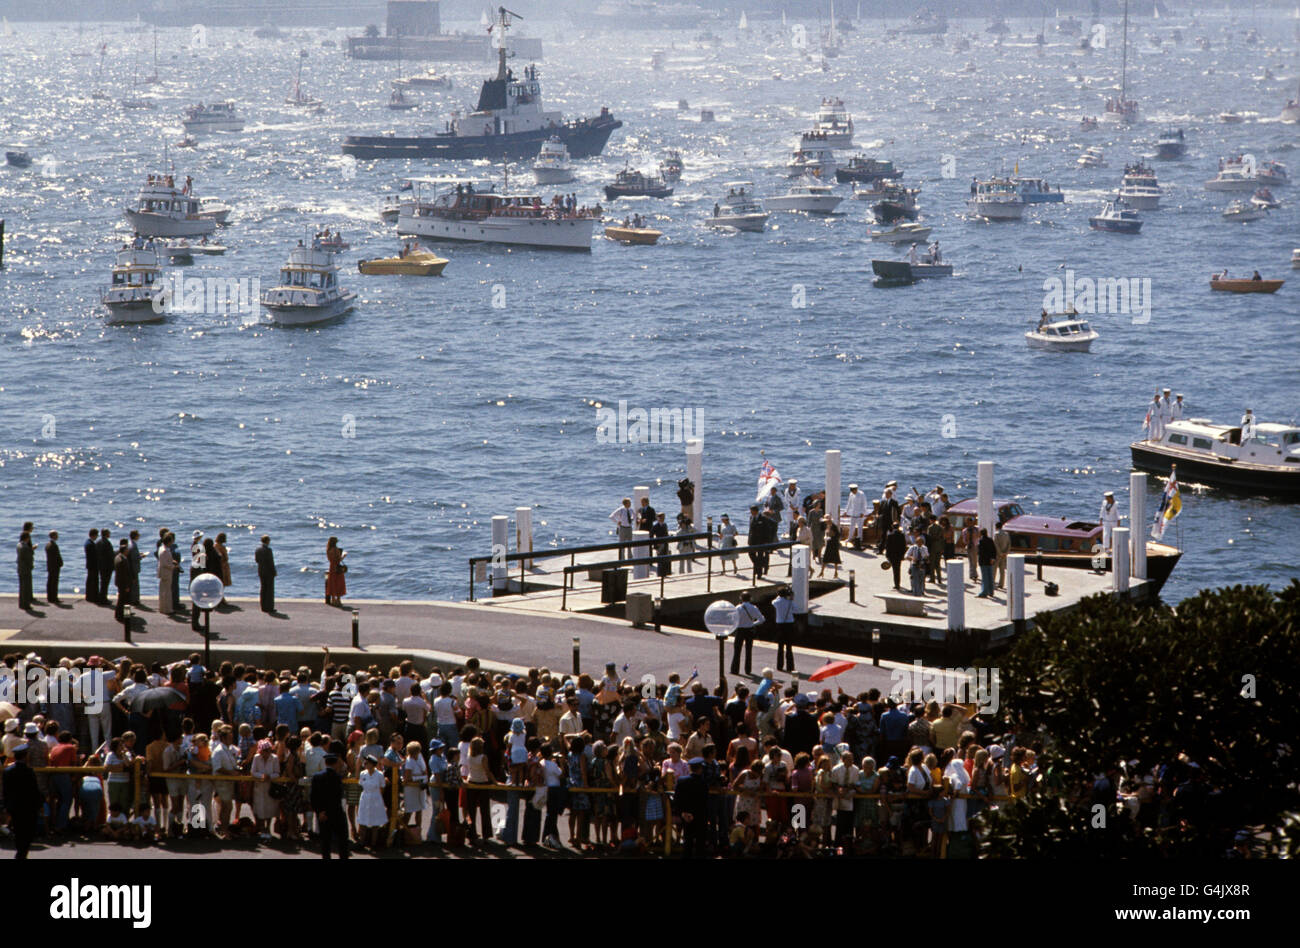 Queen Elizabeth II and the Duke of Edinburgh landing at Man O'War Steps, Sydney, after coming ashore from the Royal Yacht Britannia in the Royal Barge. Stock Photo